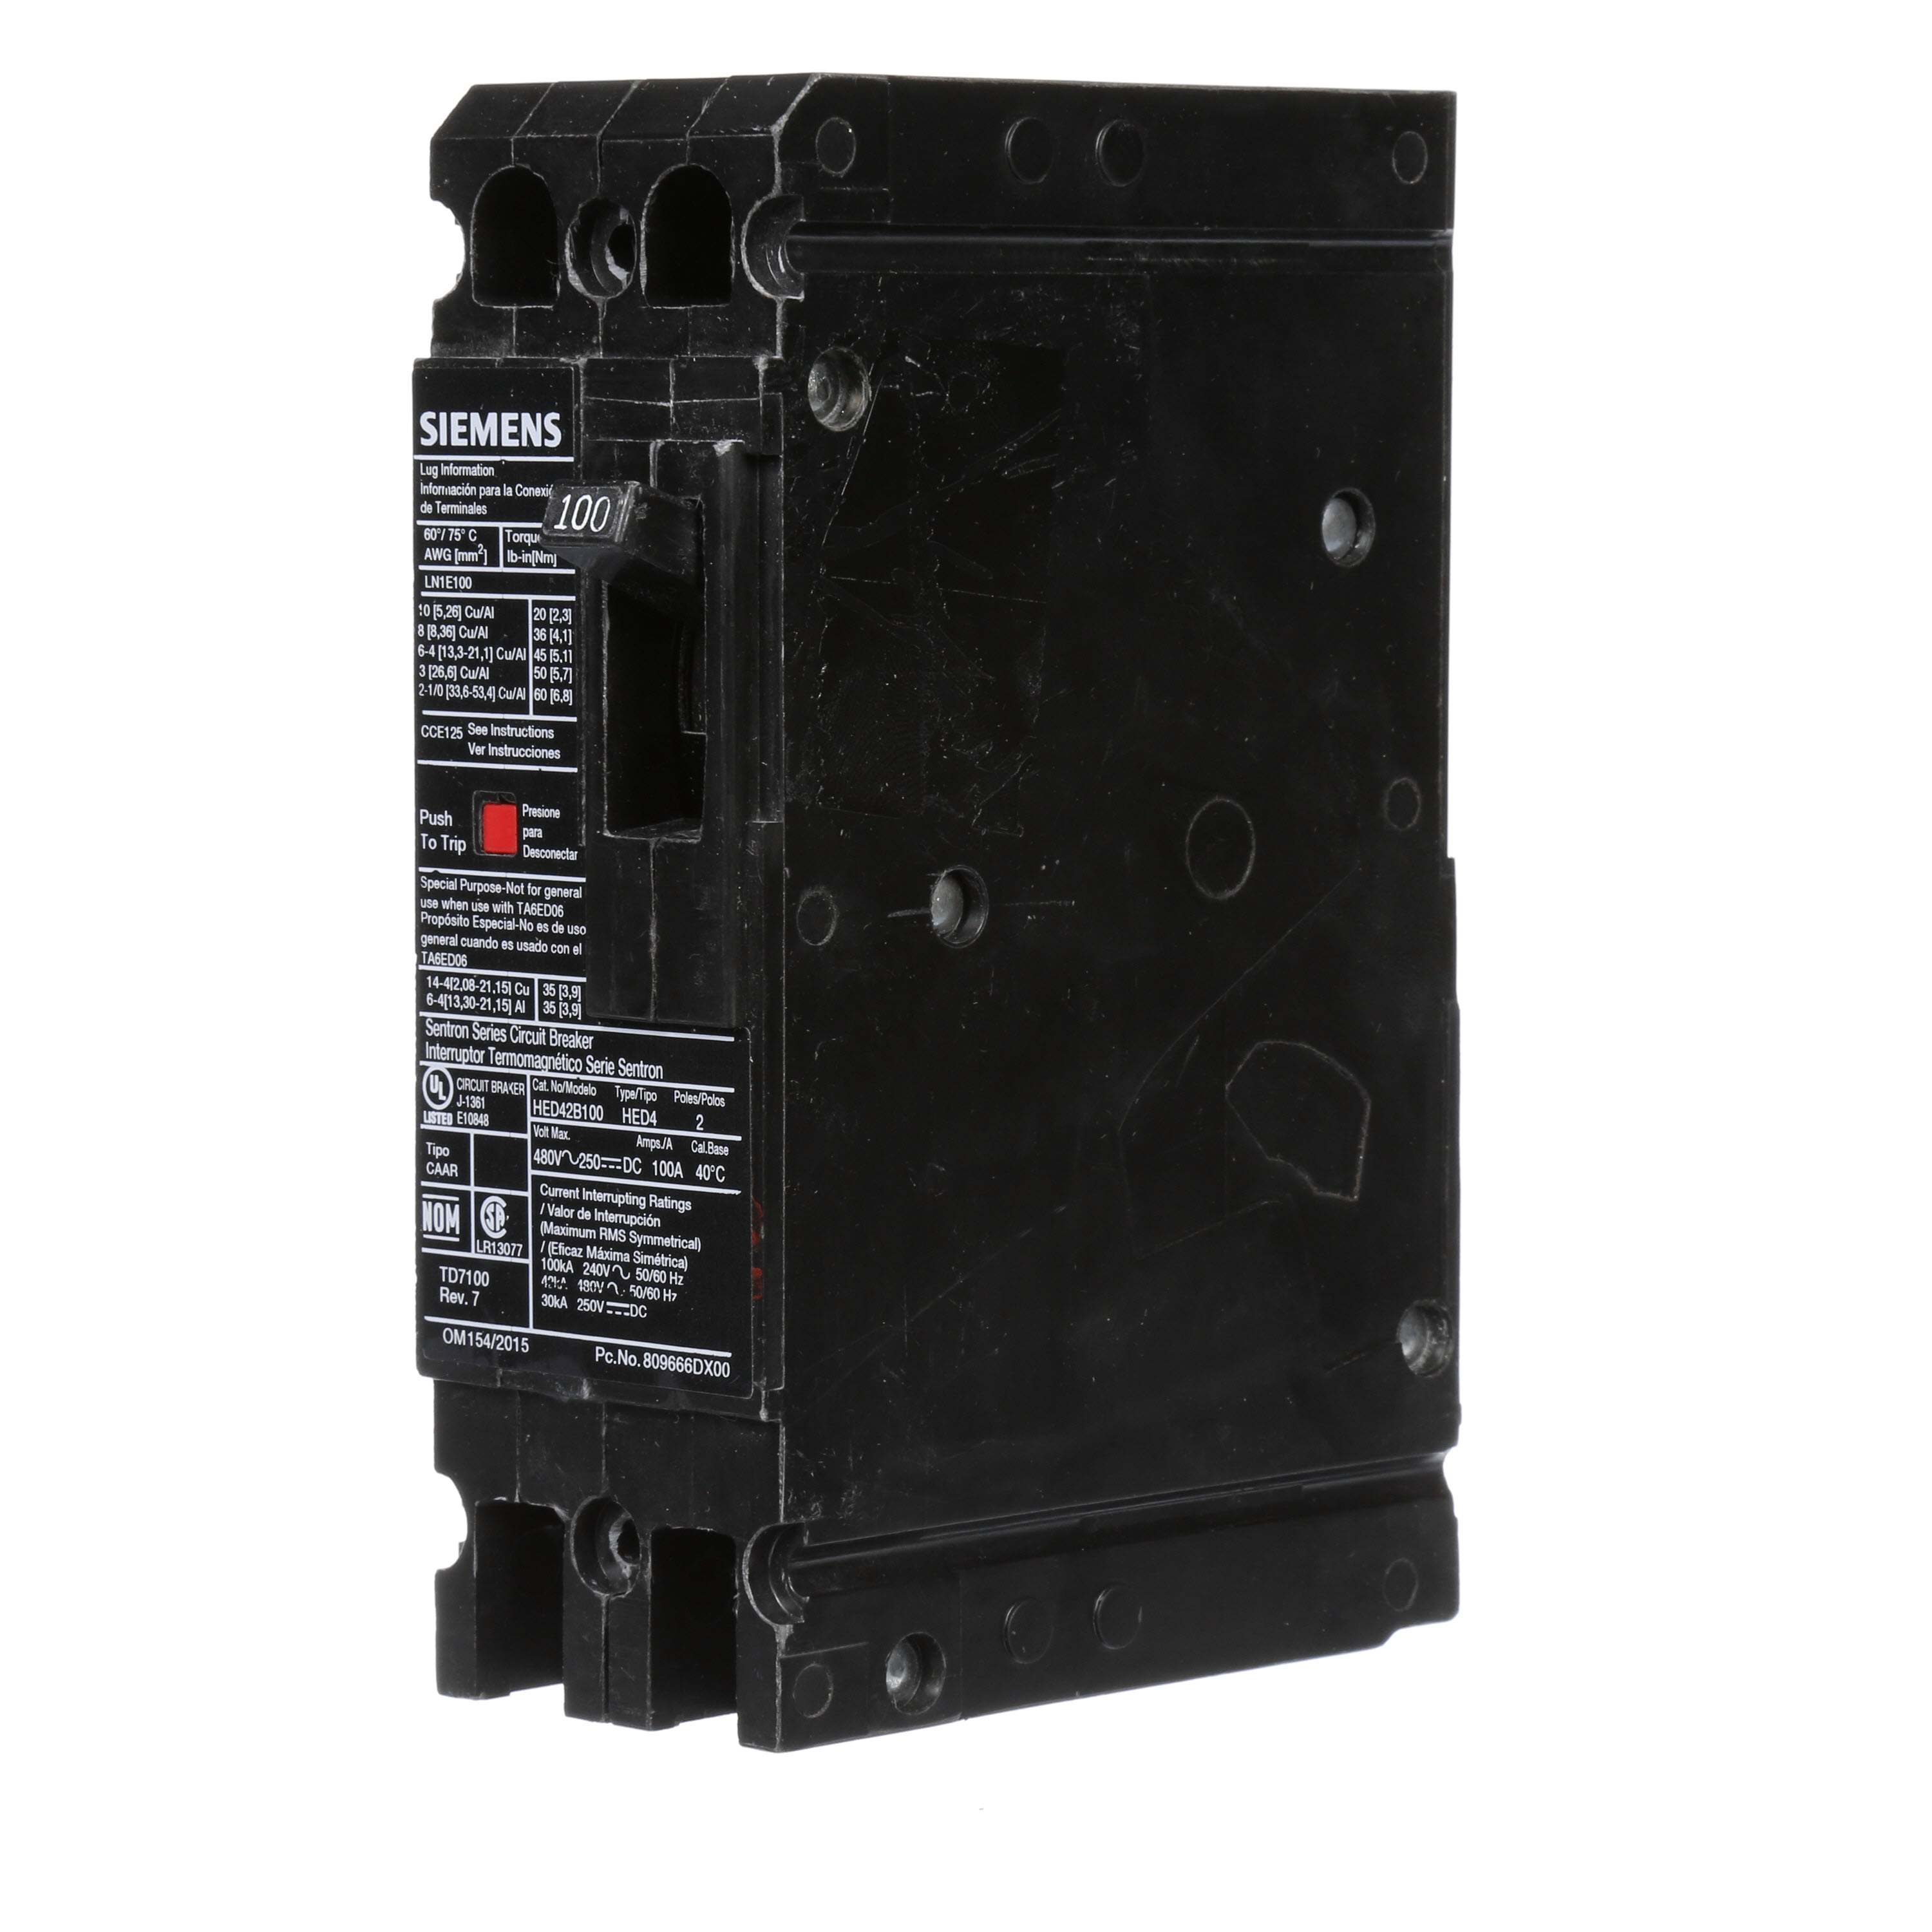 SIEMENS LOW VOLTAGE SENTRON MOLDED CASE CIRCUIT BREAKER WITH THERMAL - MAGNETICTRIP UNIT. STANDARD 40 DEG C BREAKER ED FRAME WITH HIGH BREAKING CAPACITY. 100A2-POLE (42KAIC AT 480V). NON-INTERCHANGEABLE TRIP UNIT. SPECIAL FEATURES LOAD LUGS ONLY (LN1E100) WIRE RANGE 10 - 1/0AWG (CU/AL). DIMENSIONS (W x H x D) IN 2.00 x 6.4 x 3.92.